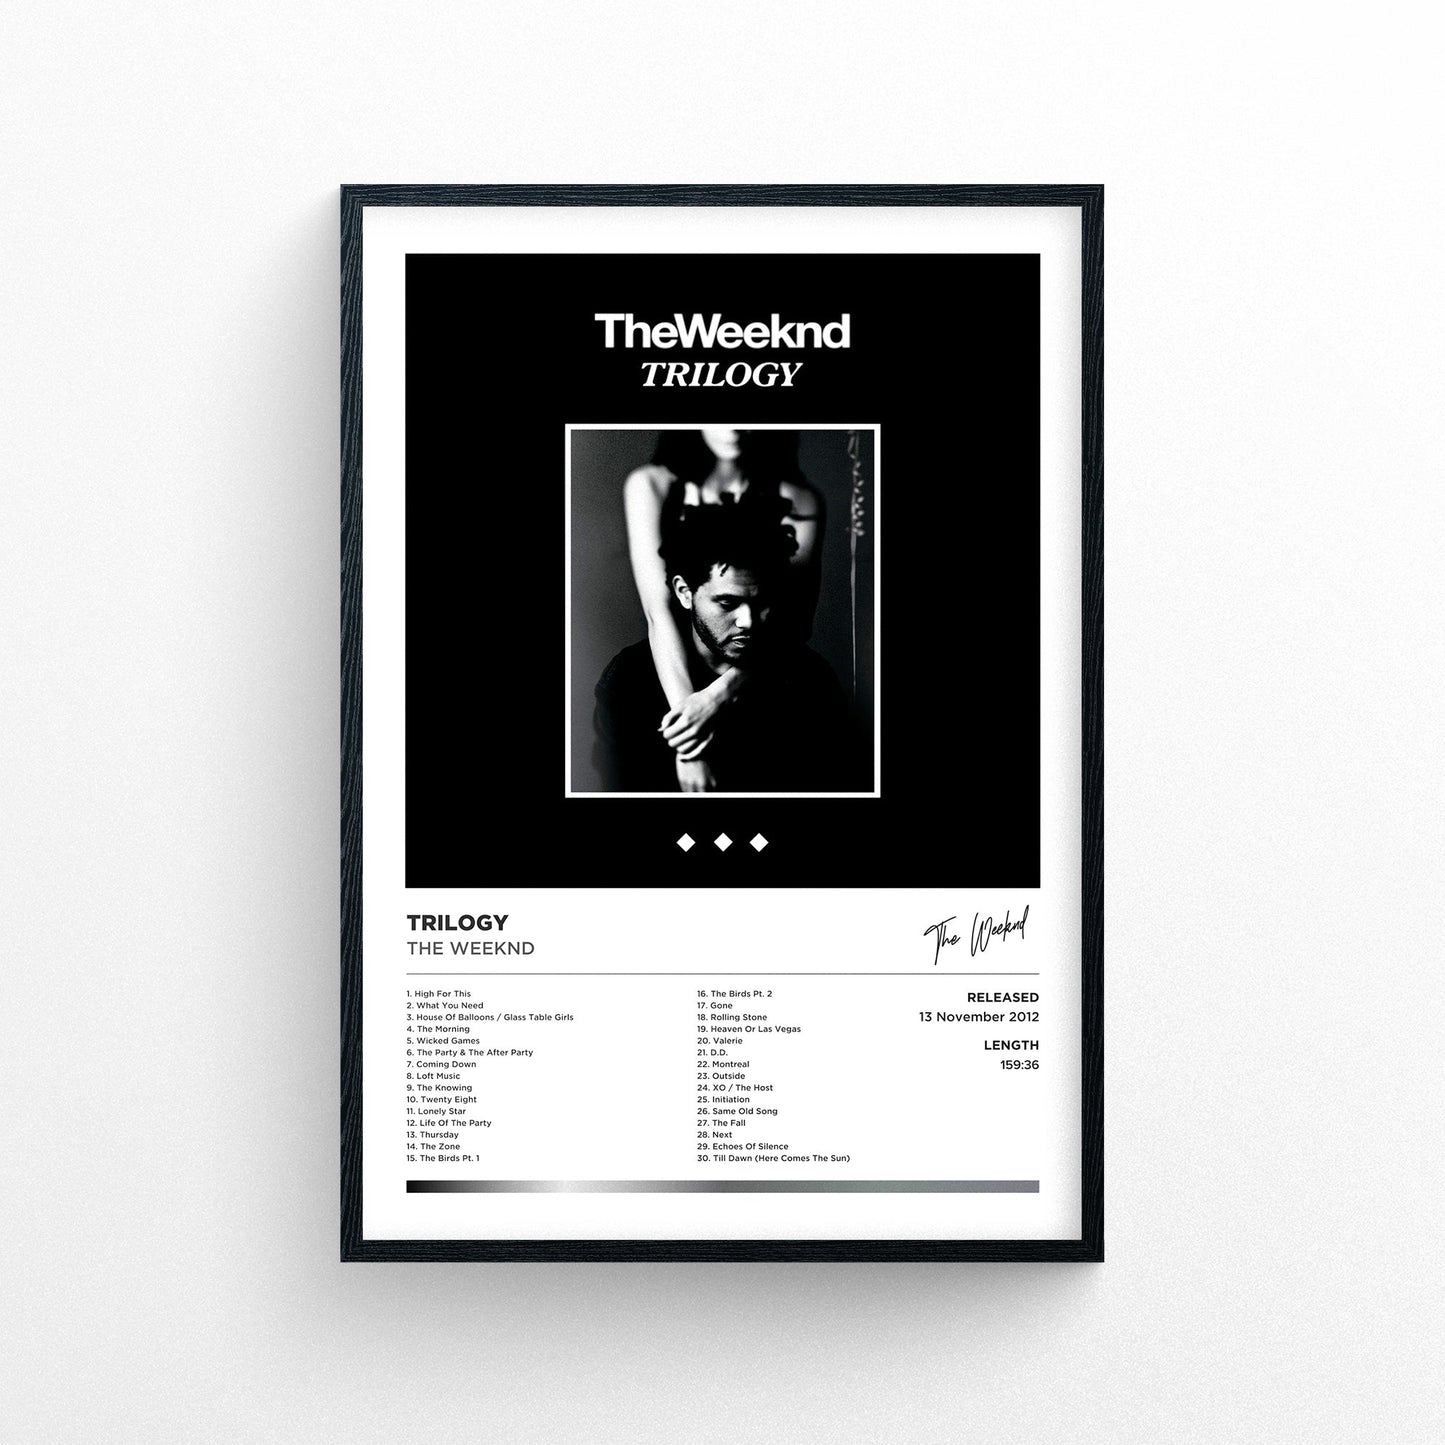 The Weeknd - Trilogy Framed Poster Print | Polaroid Style | Album Cover Artwork